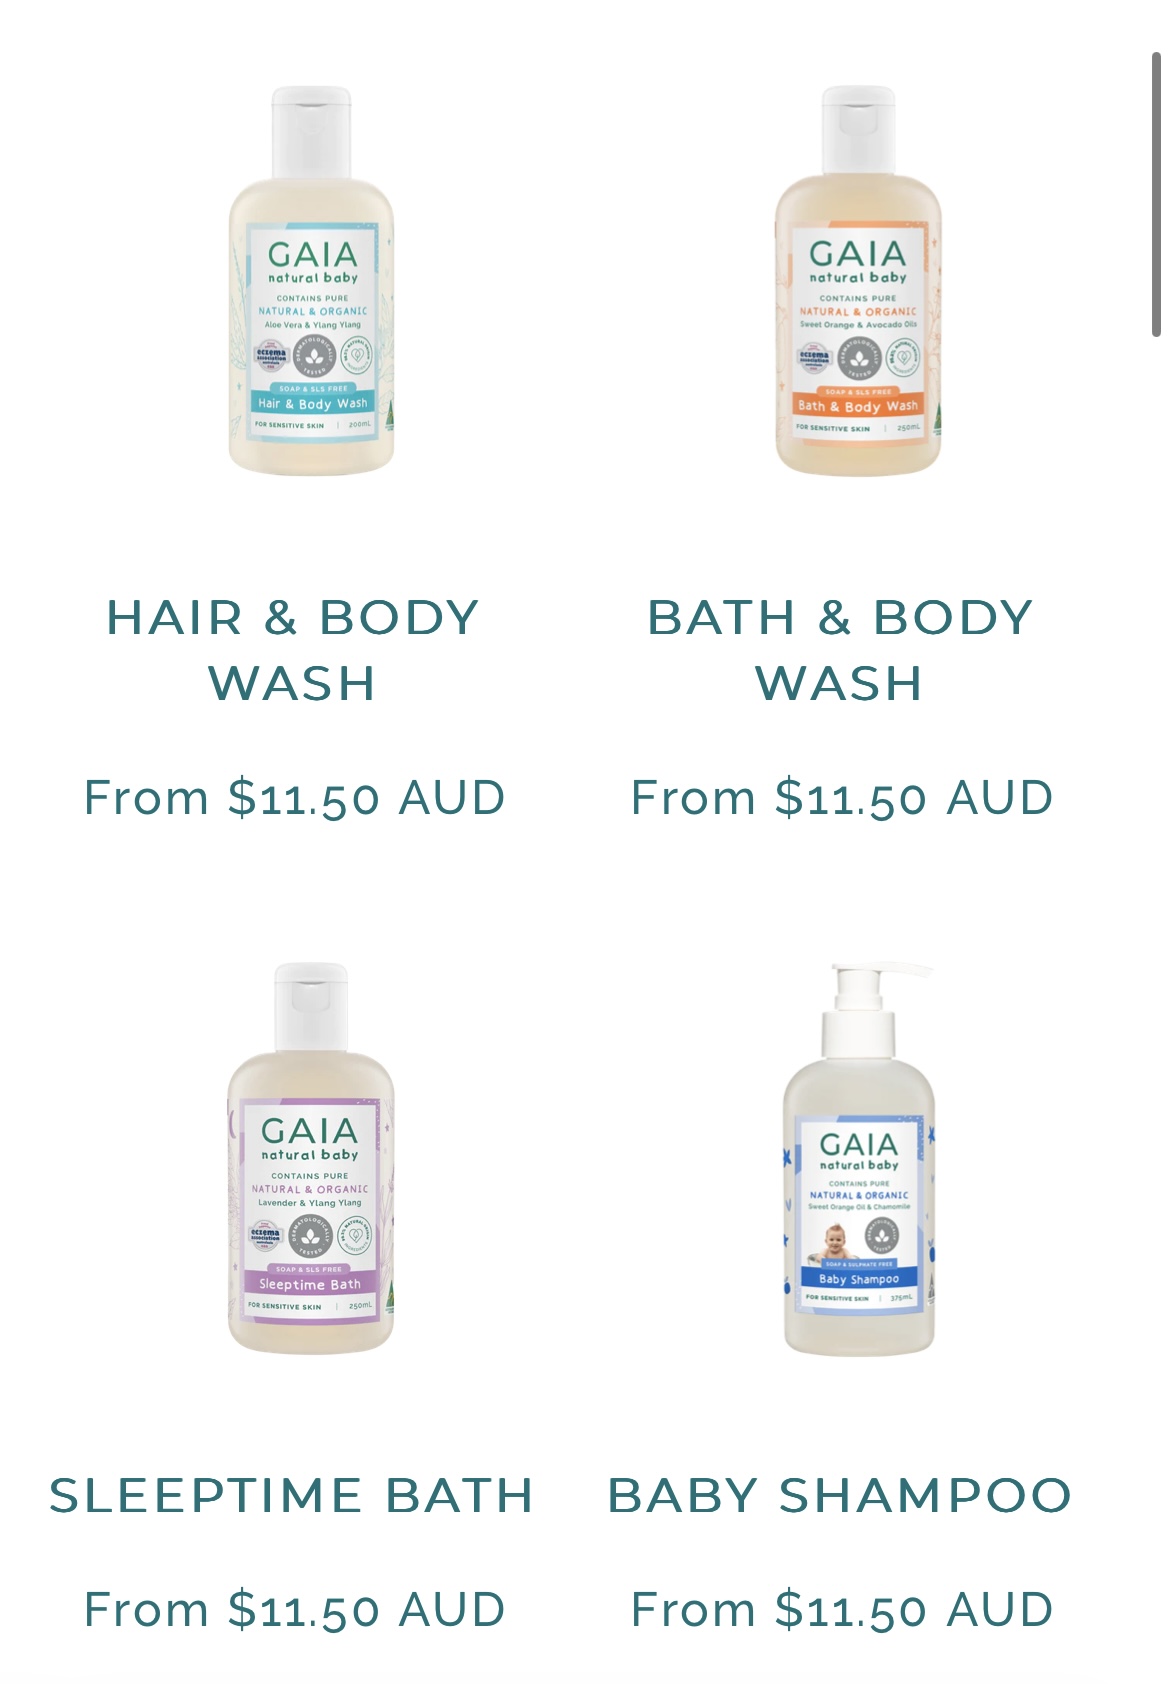 Gaia natural baby products